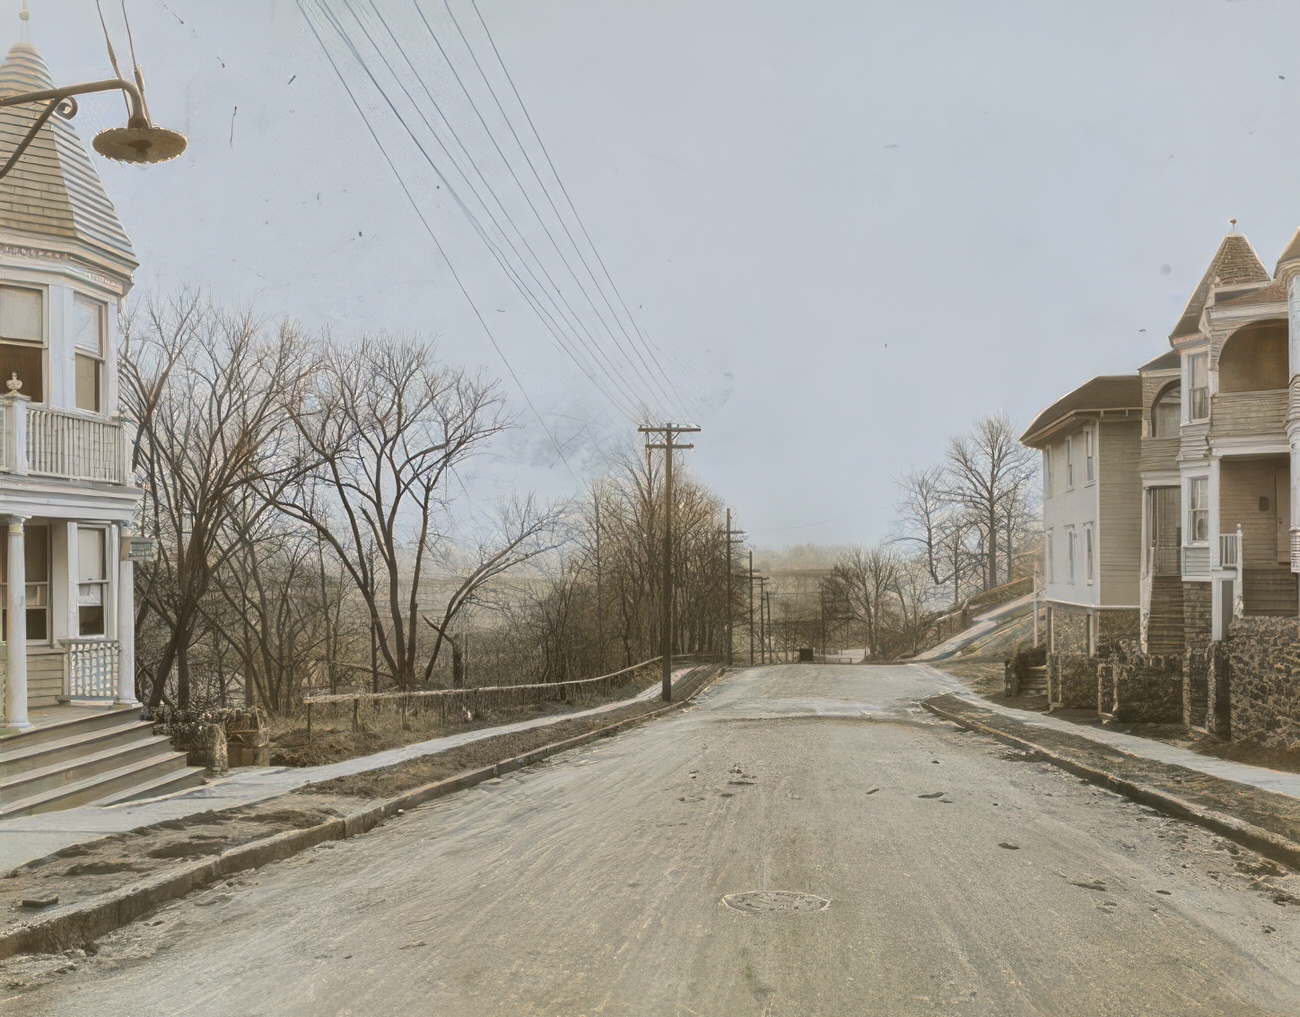 Shakespeare Avenue Showing Huber Property And New Subway, Circa 1915.